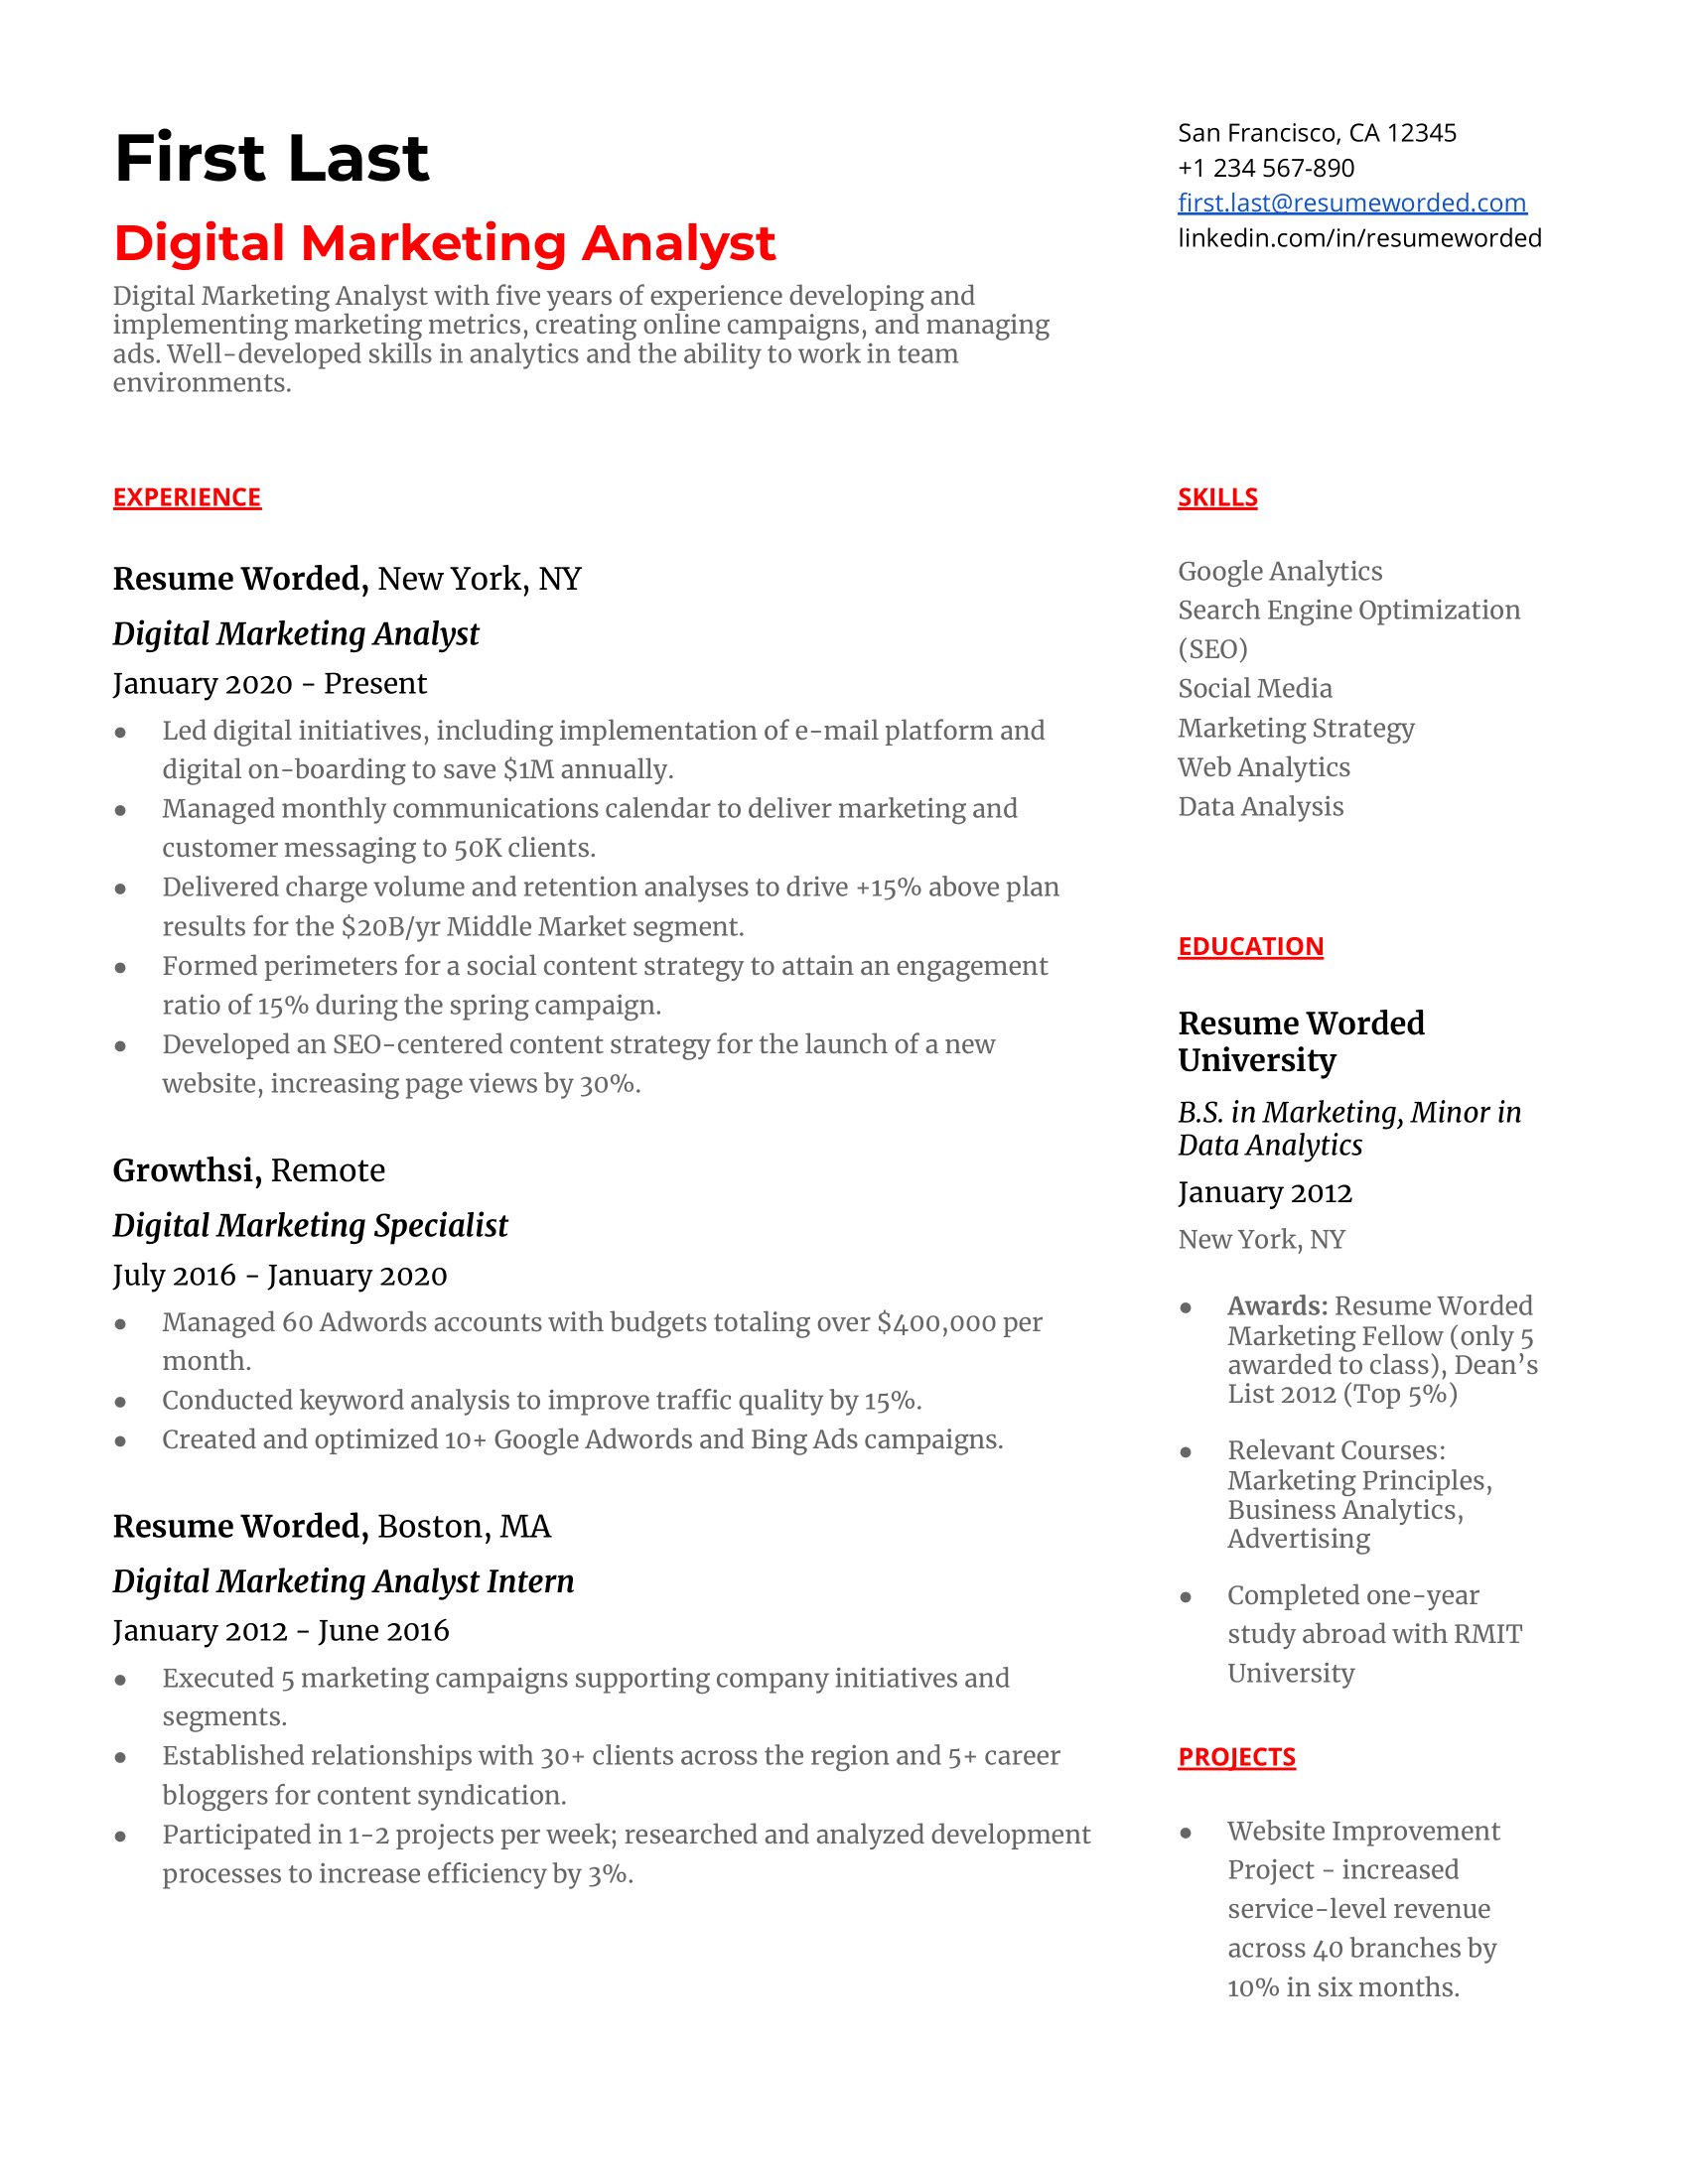 A digital marketing analyst resume template that uses relevant experience in marketing and data analytics.